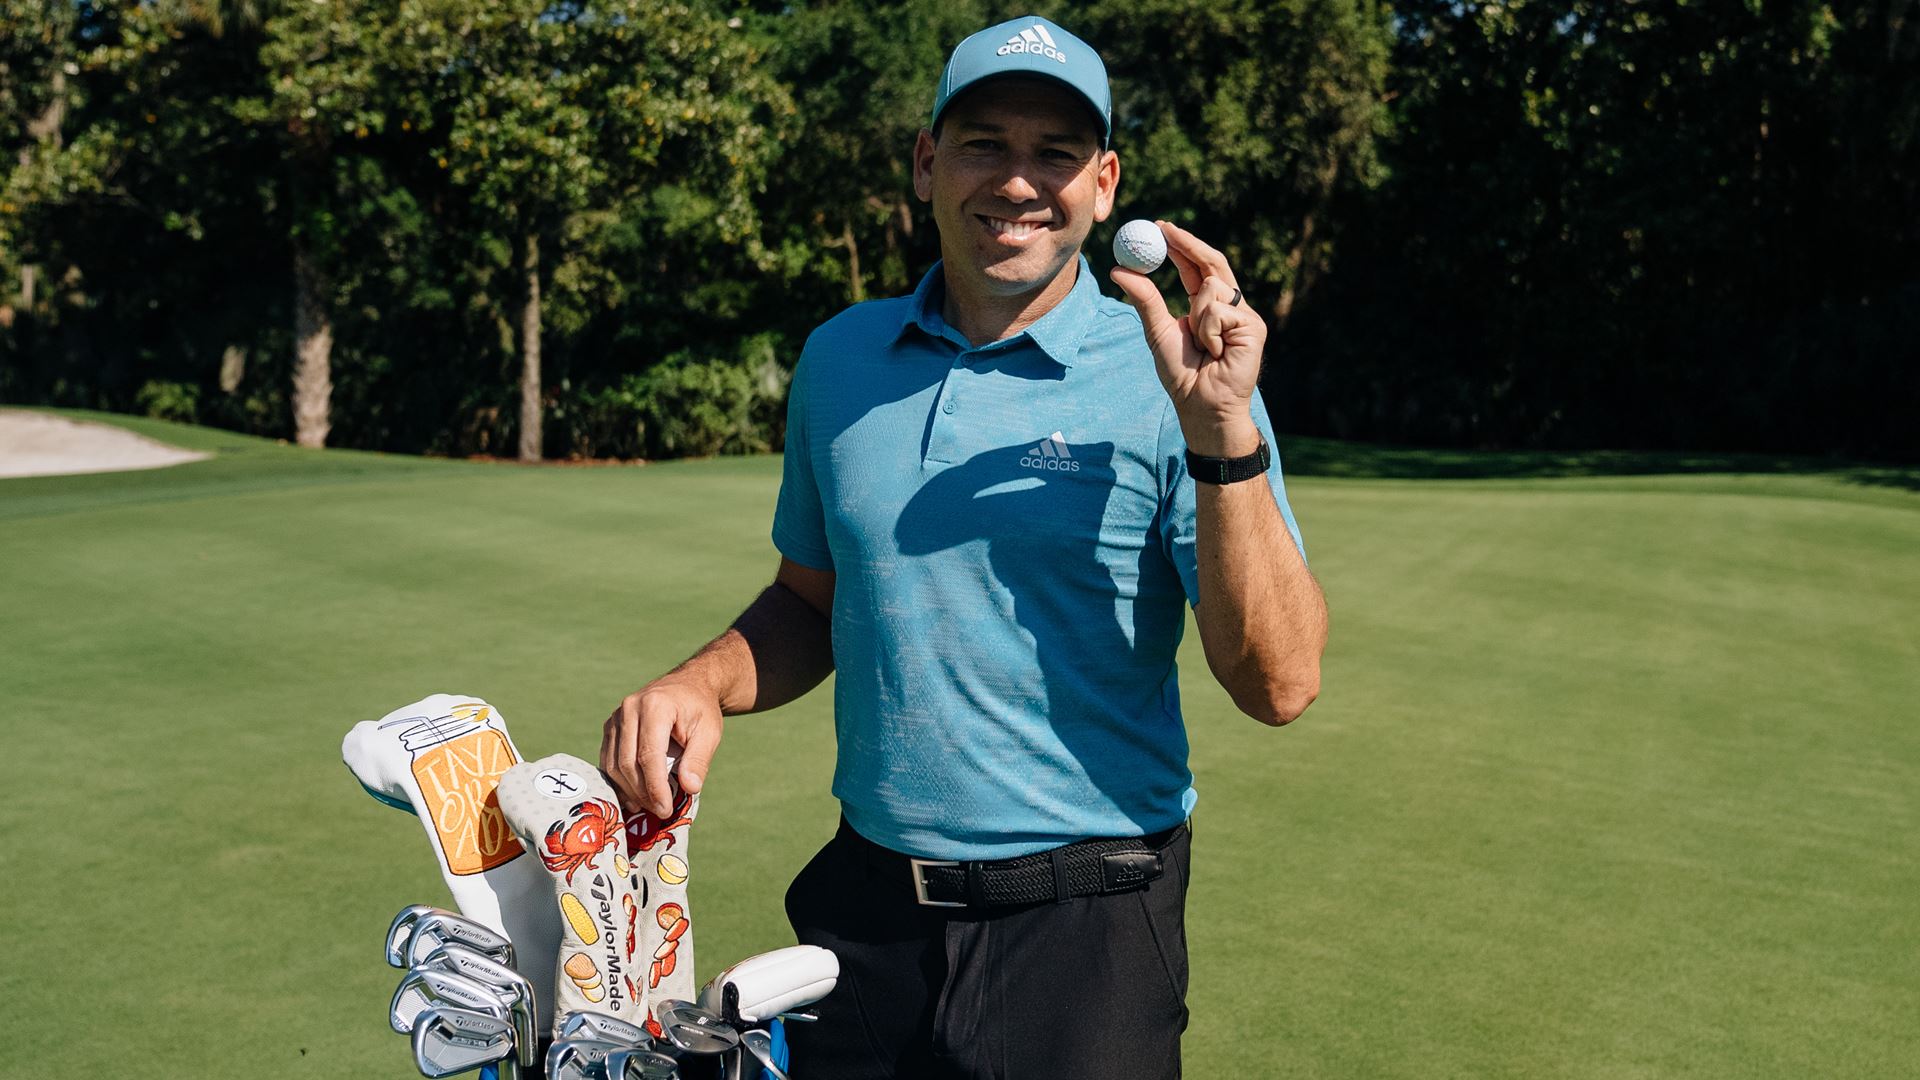 TaylorMade Golf Company Announces The Return of Sergio Garcia to Team TaylorMade